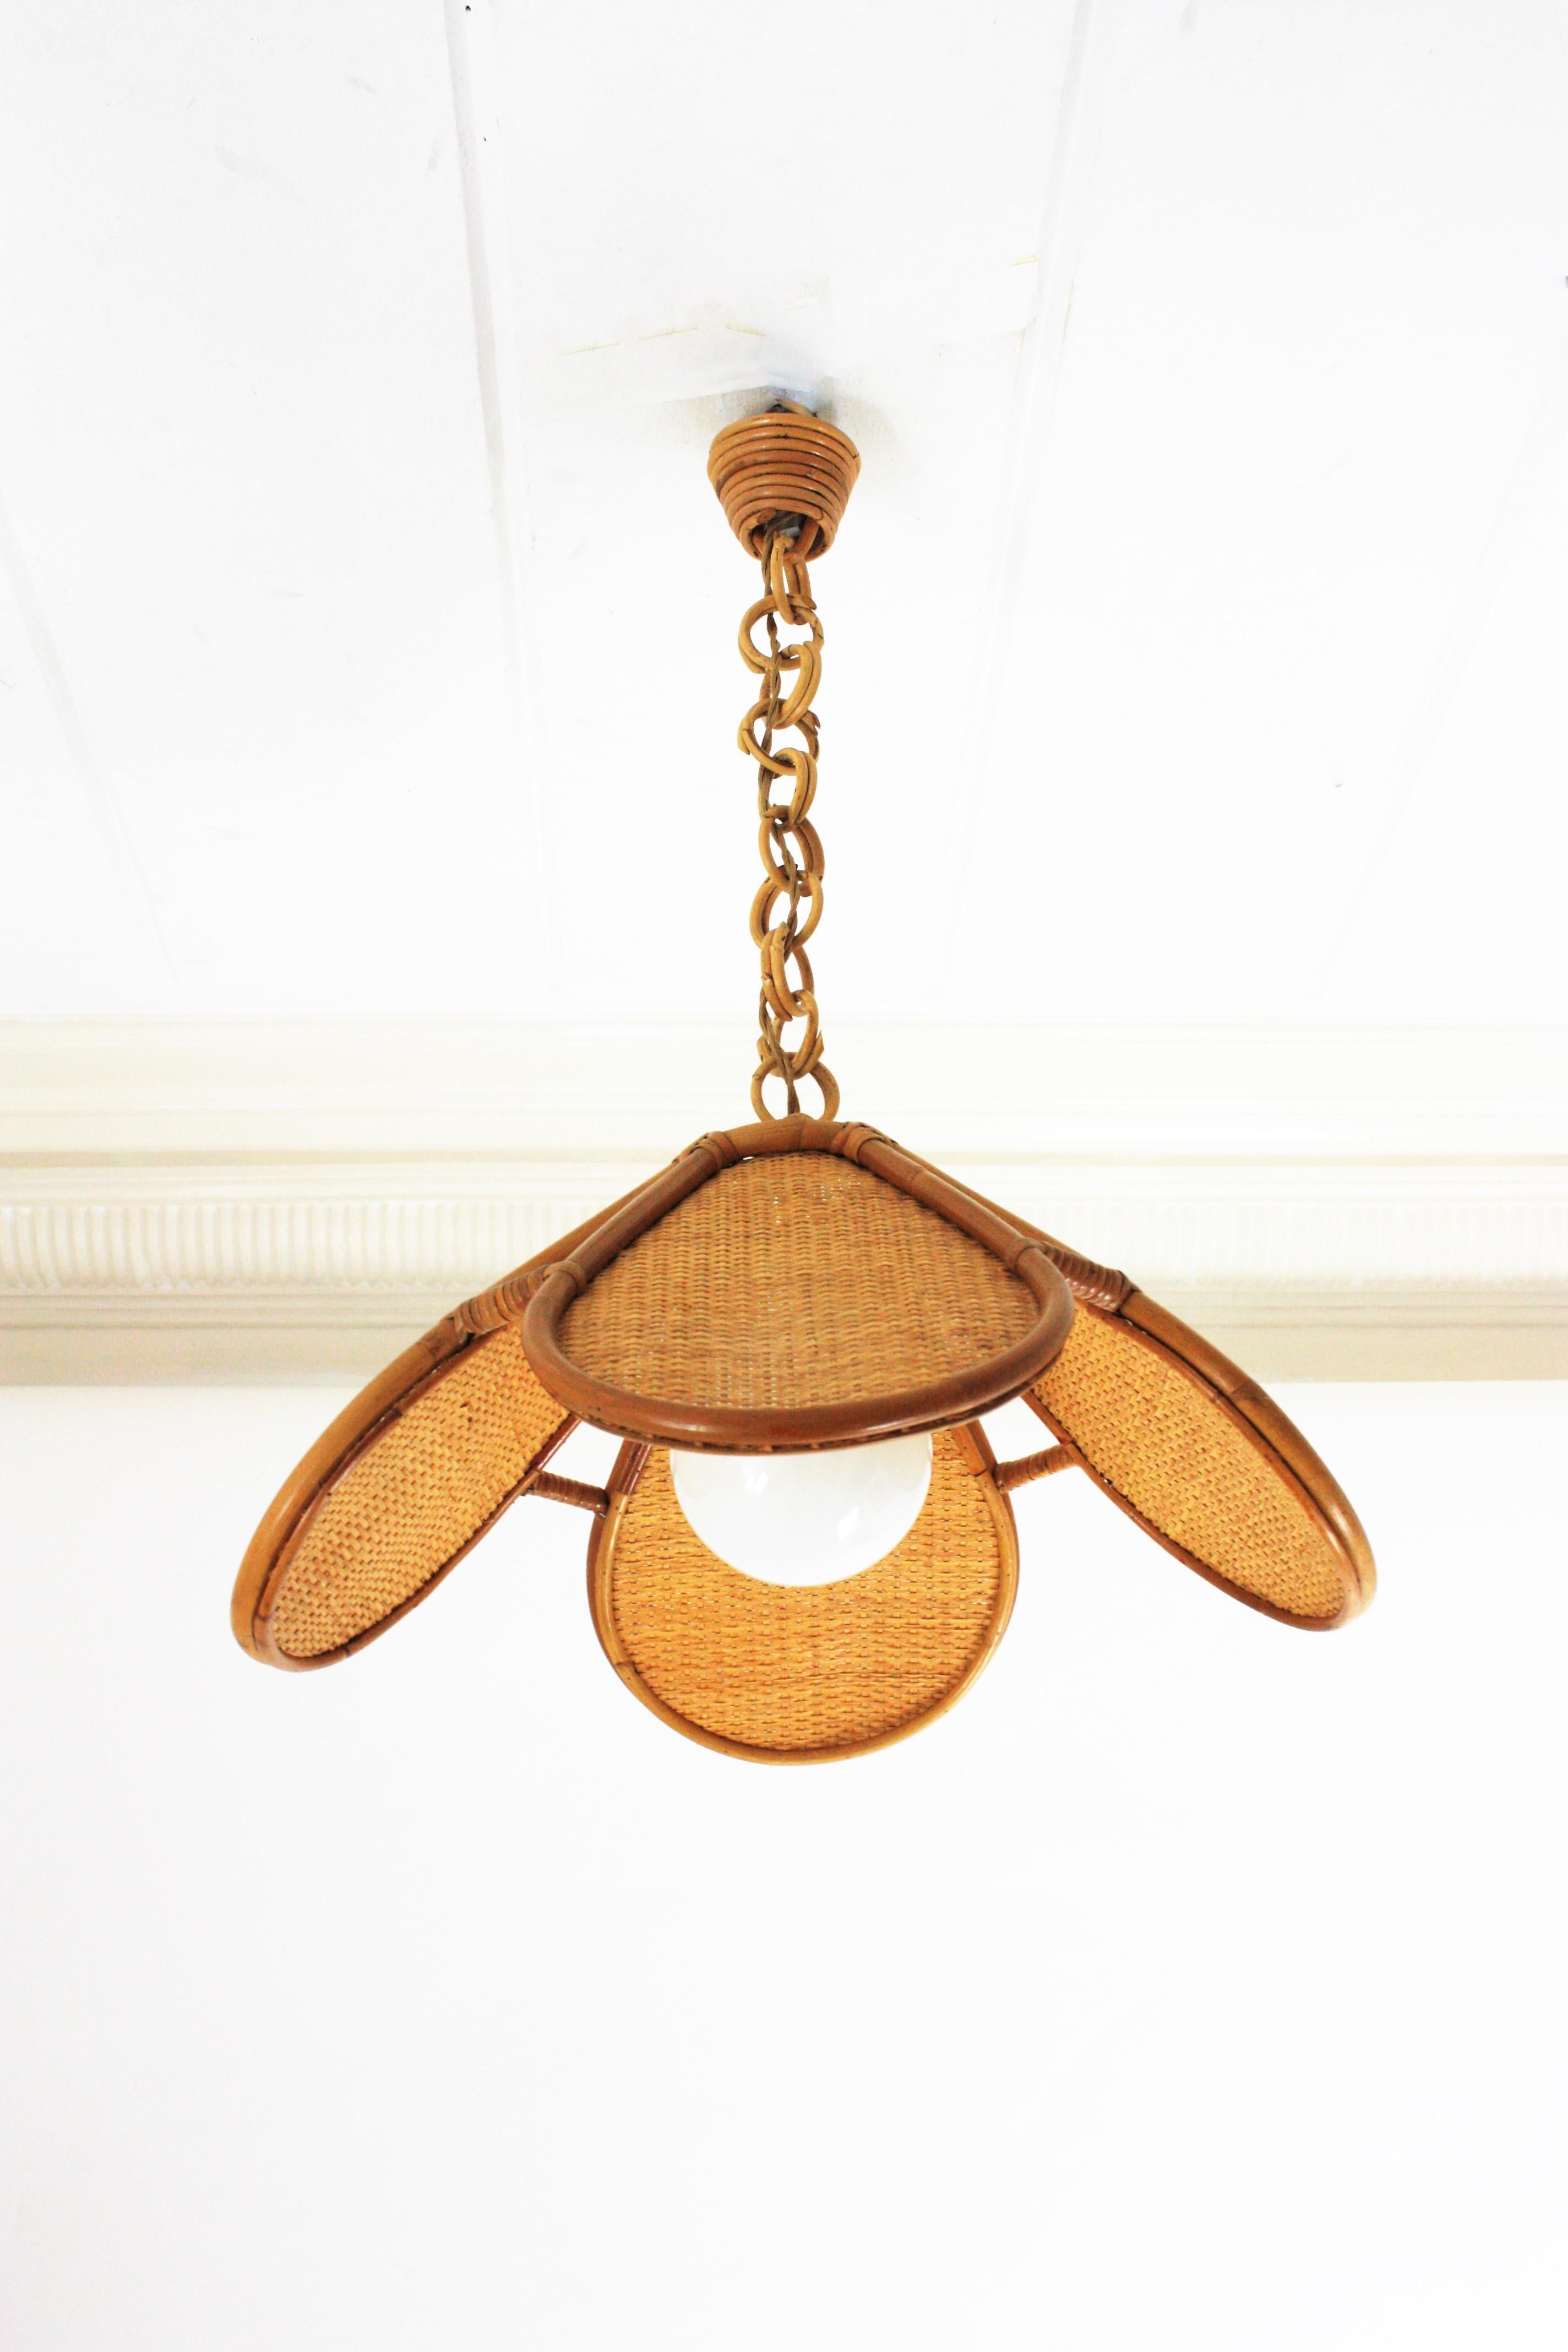 Elegant handcrafted bamboo and rattan or wicker weave flower shaped or palm pendant hanging lamp, Spain, 1960s.
This beautiful suspension lamp features a palm shaped bamboo lampshade structure with woven wicker panels. It hangs from a chain with